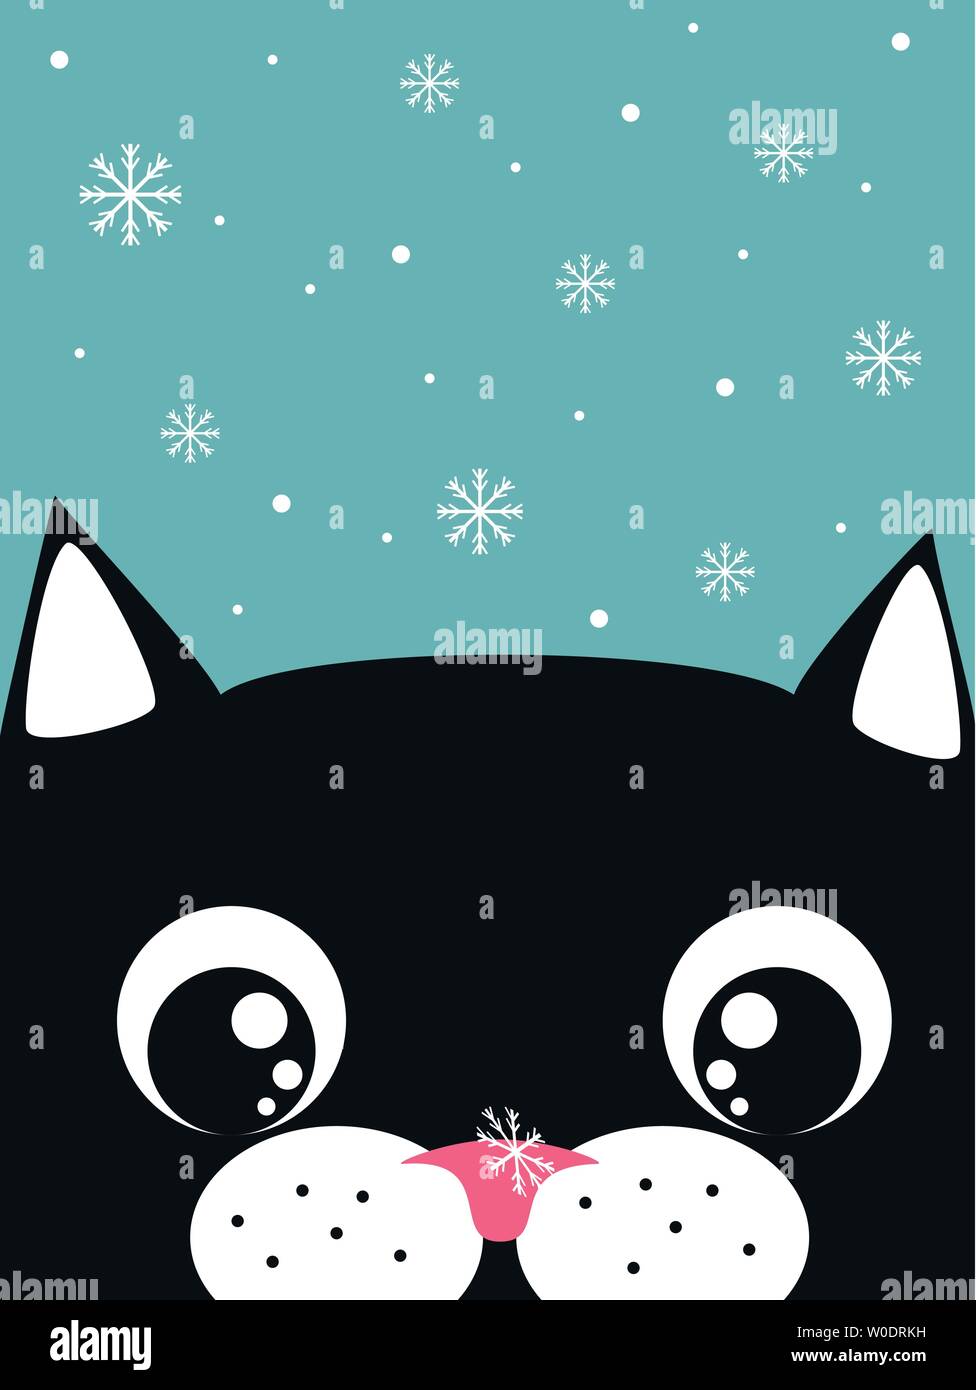 Funny Cartoon Cat With Snowflake On The Nose Vector Card Template